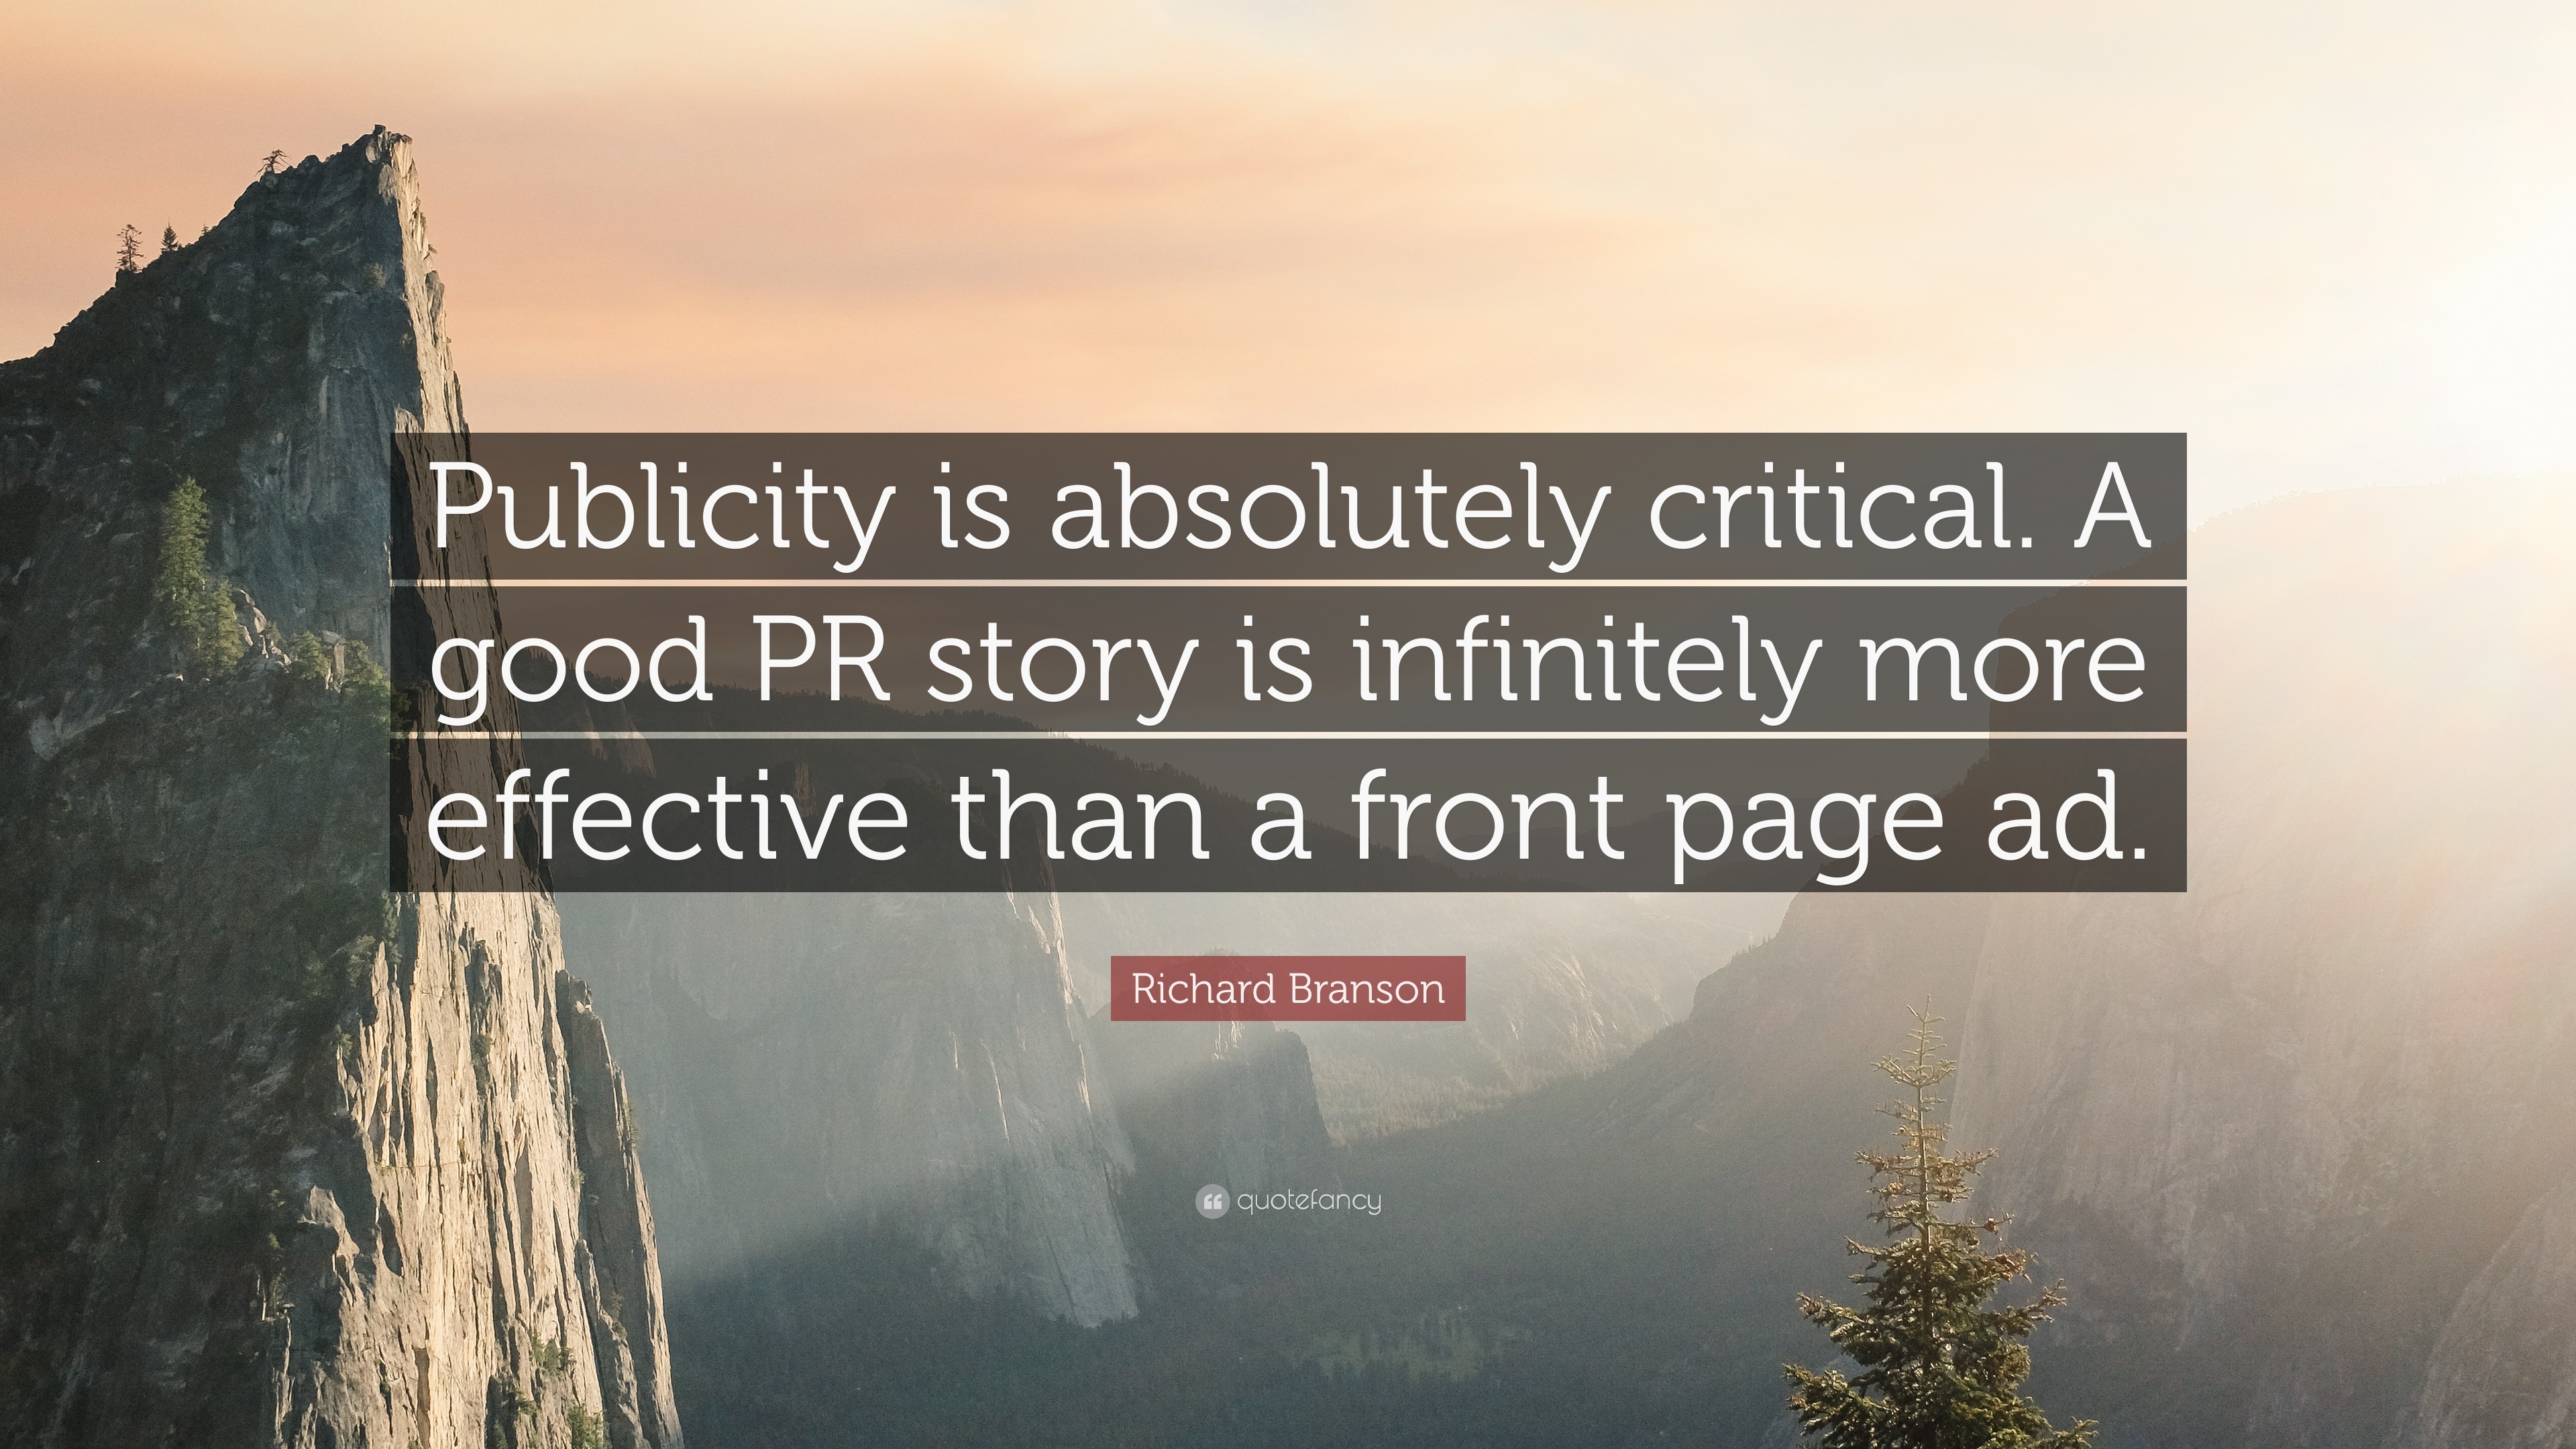 Richard Branson Quote Publicity Is Absolutely Critical A Good Pr Story Is Infinitely More Effective Than